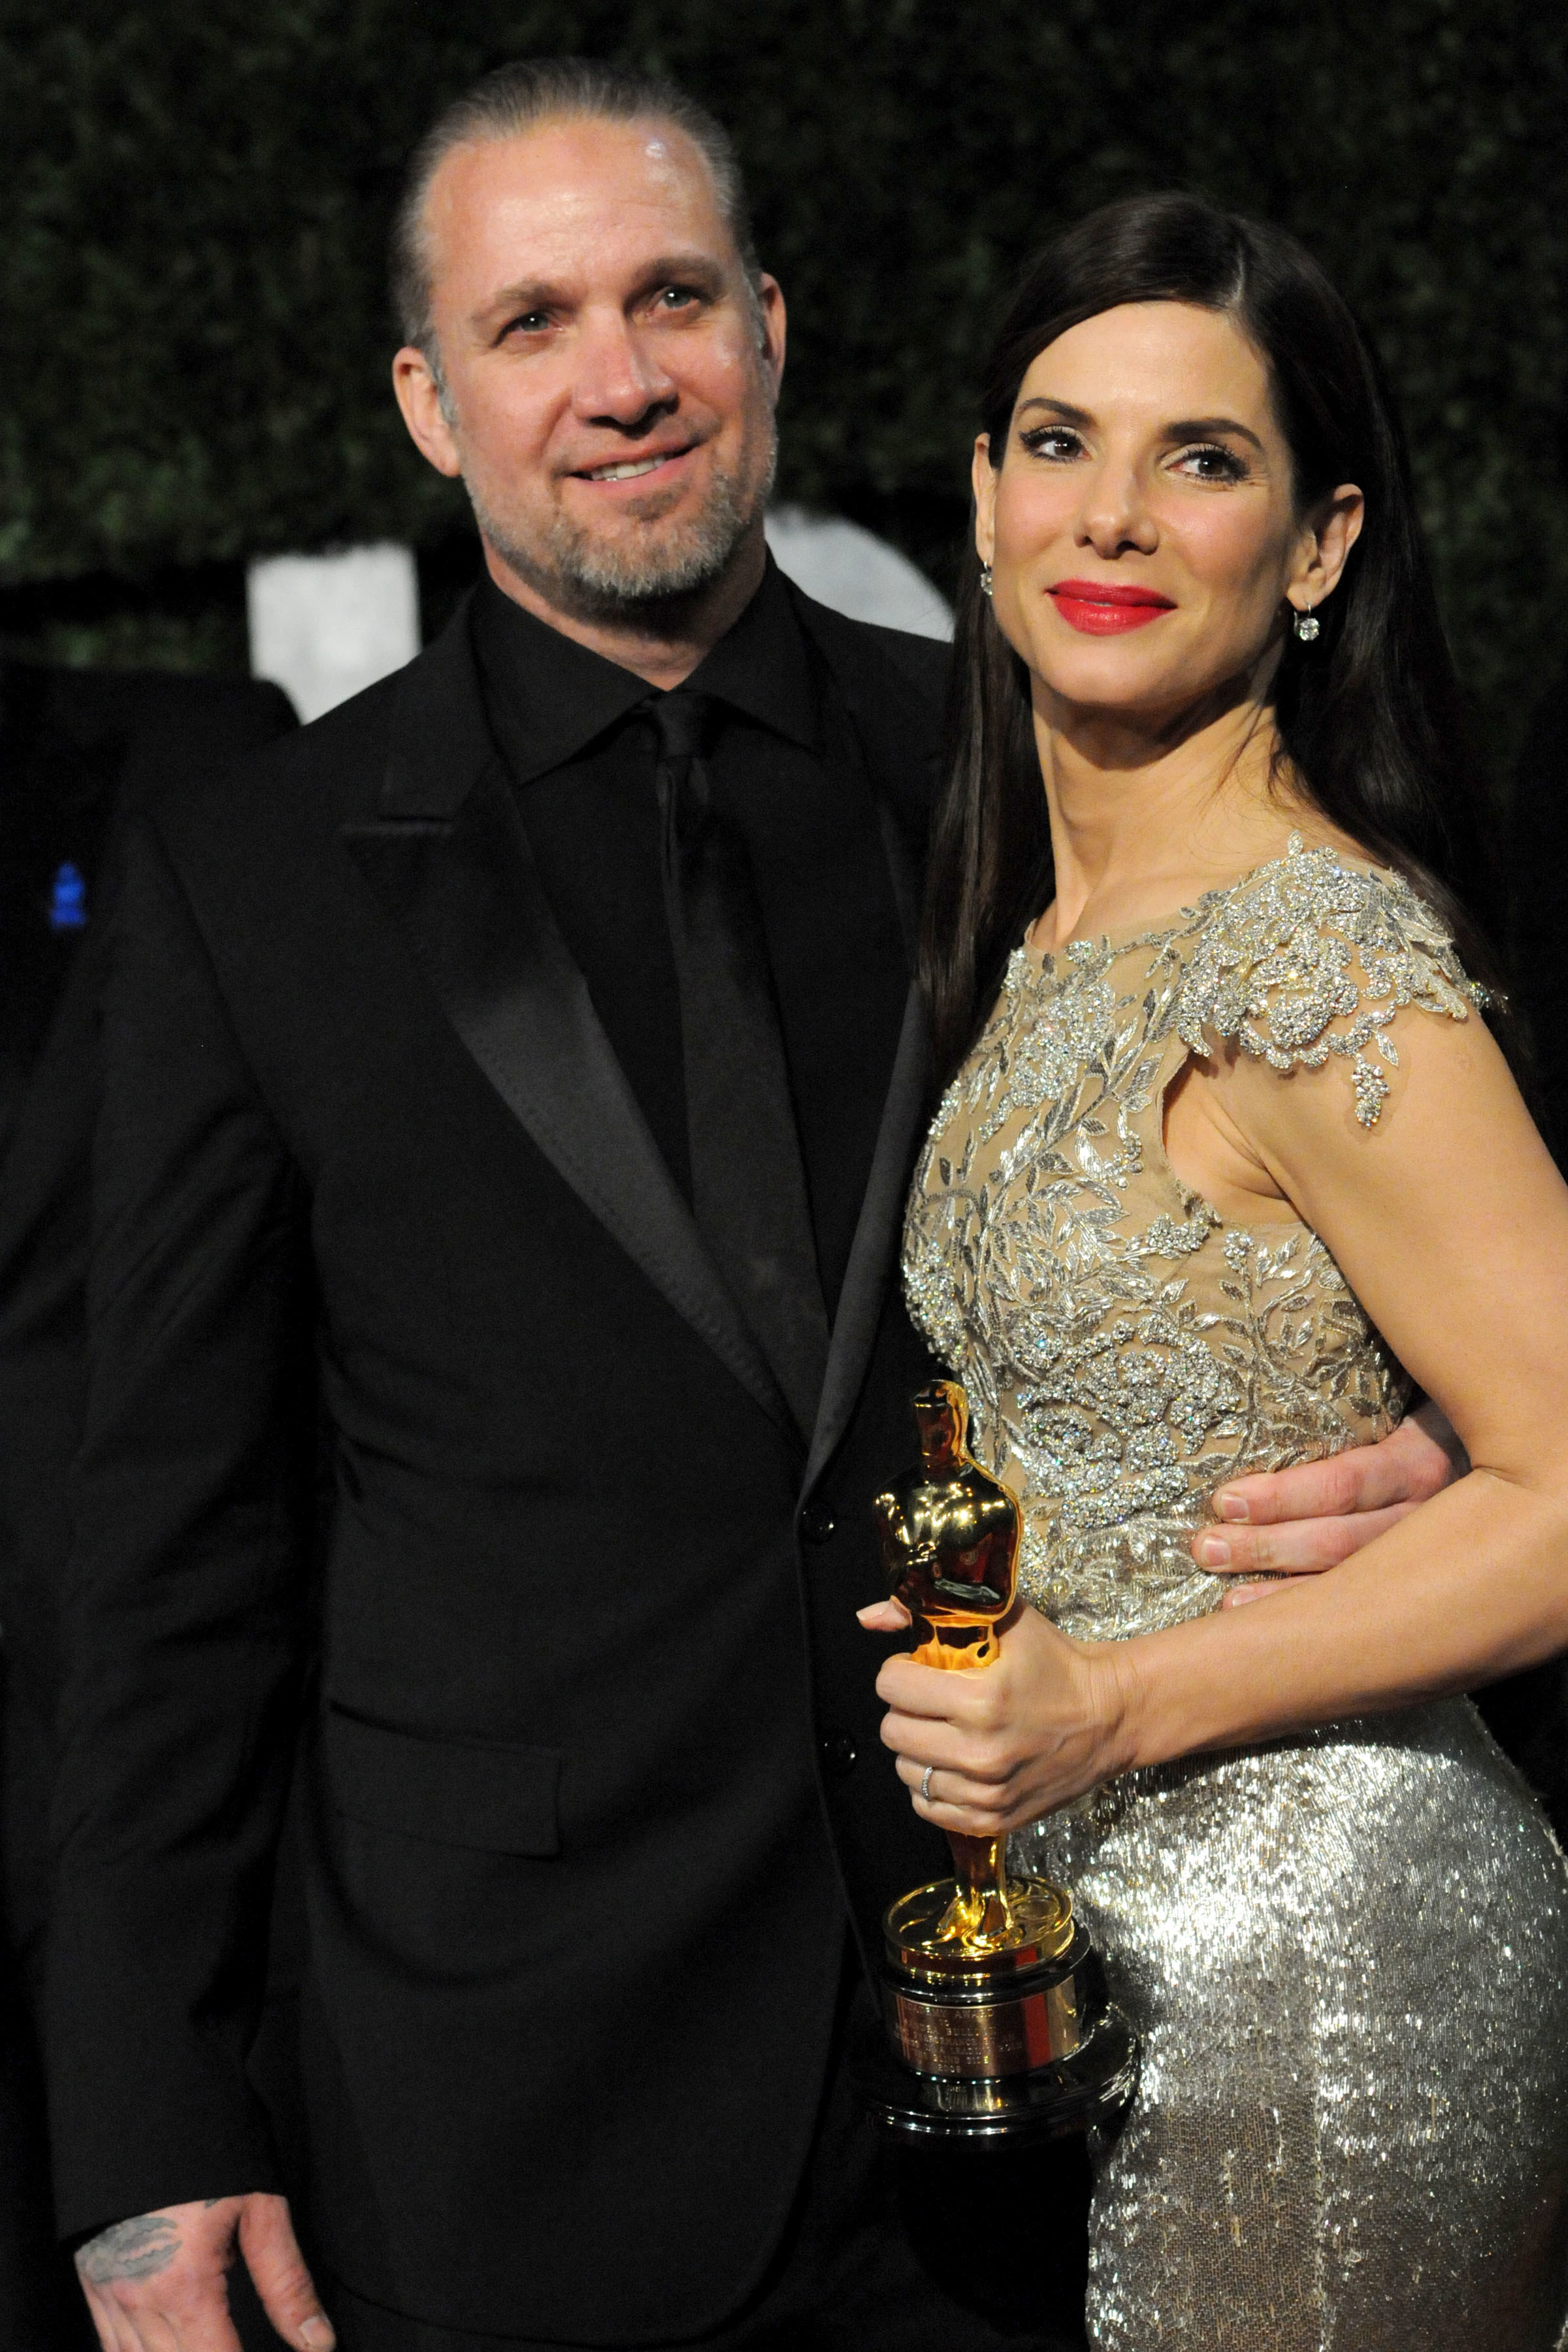 Jesse James and Sandra Bullock attend VANITY FAIR Oscar Party in March 2010